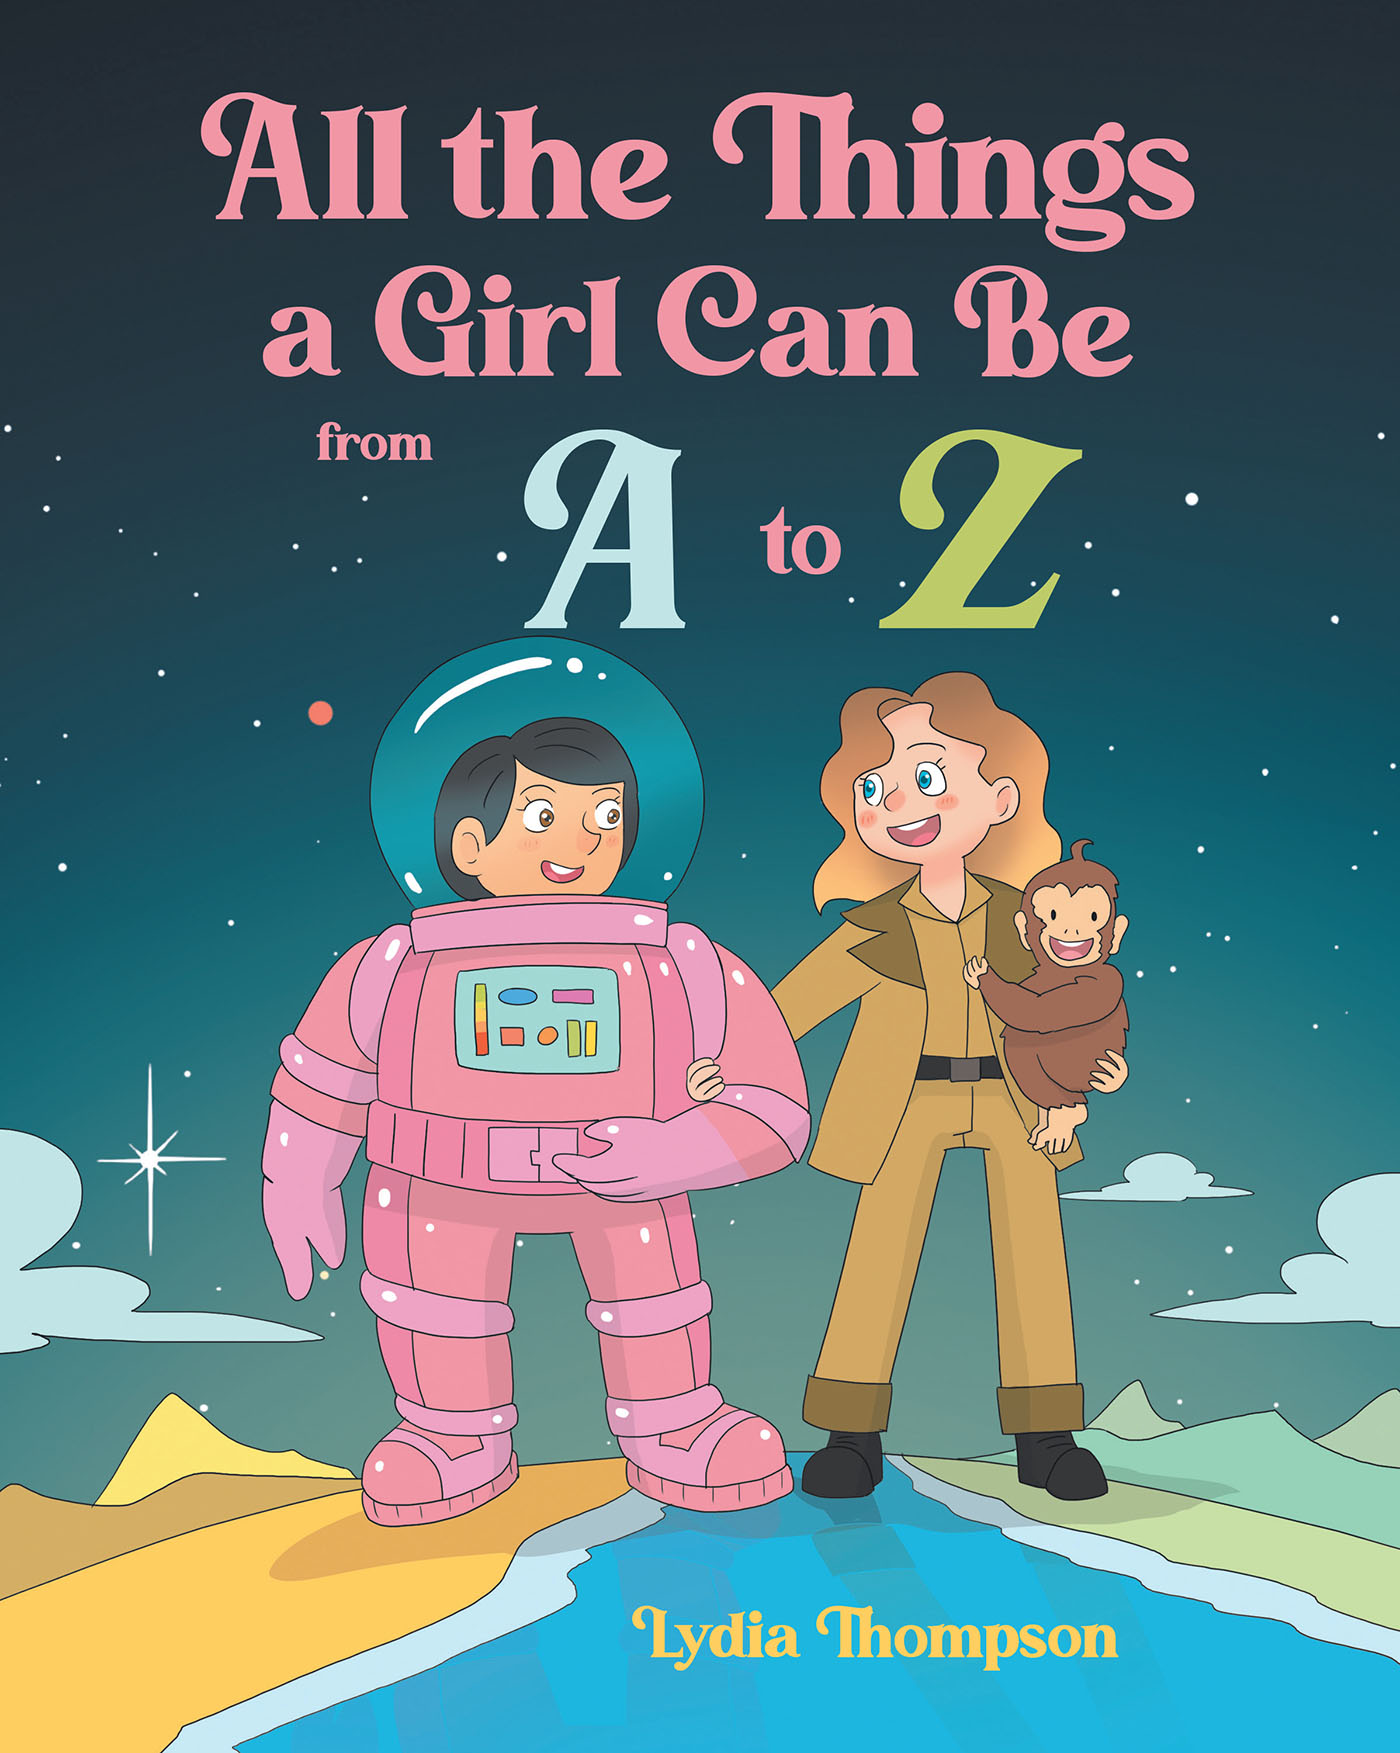 Lydia Thompson’s Newly Released “All the Things a Girl Can Be from A to Z” is a Celebration of the Potential Held Within Each Young Girl